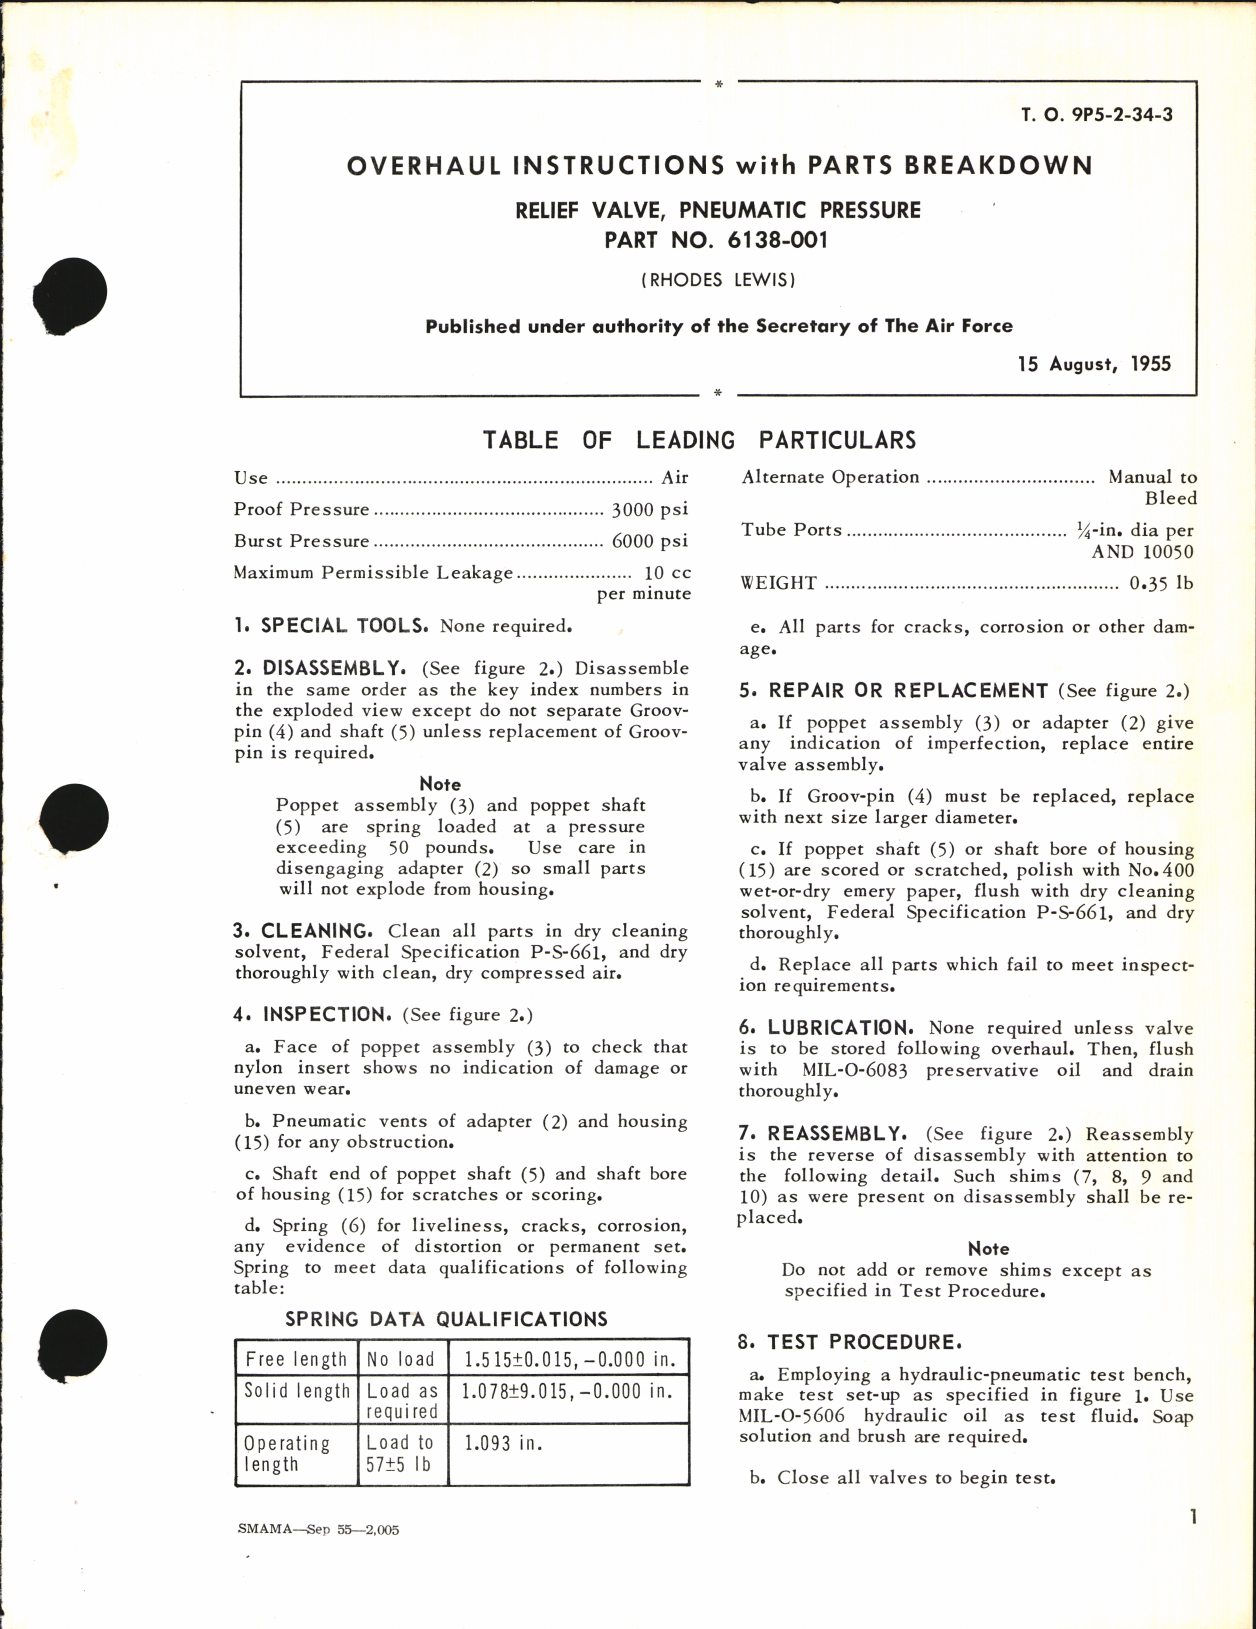 Sample page 1 from AirCorps Library document: Overhaul Instructions with Parts Breakdown for Relief Valve, Pneumatic Pressure Part No. 6138-001